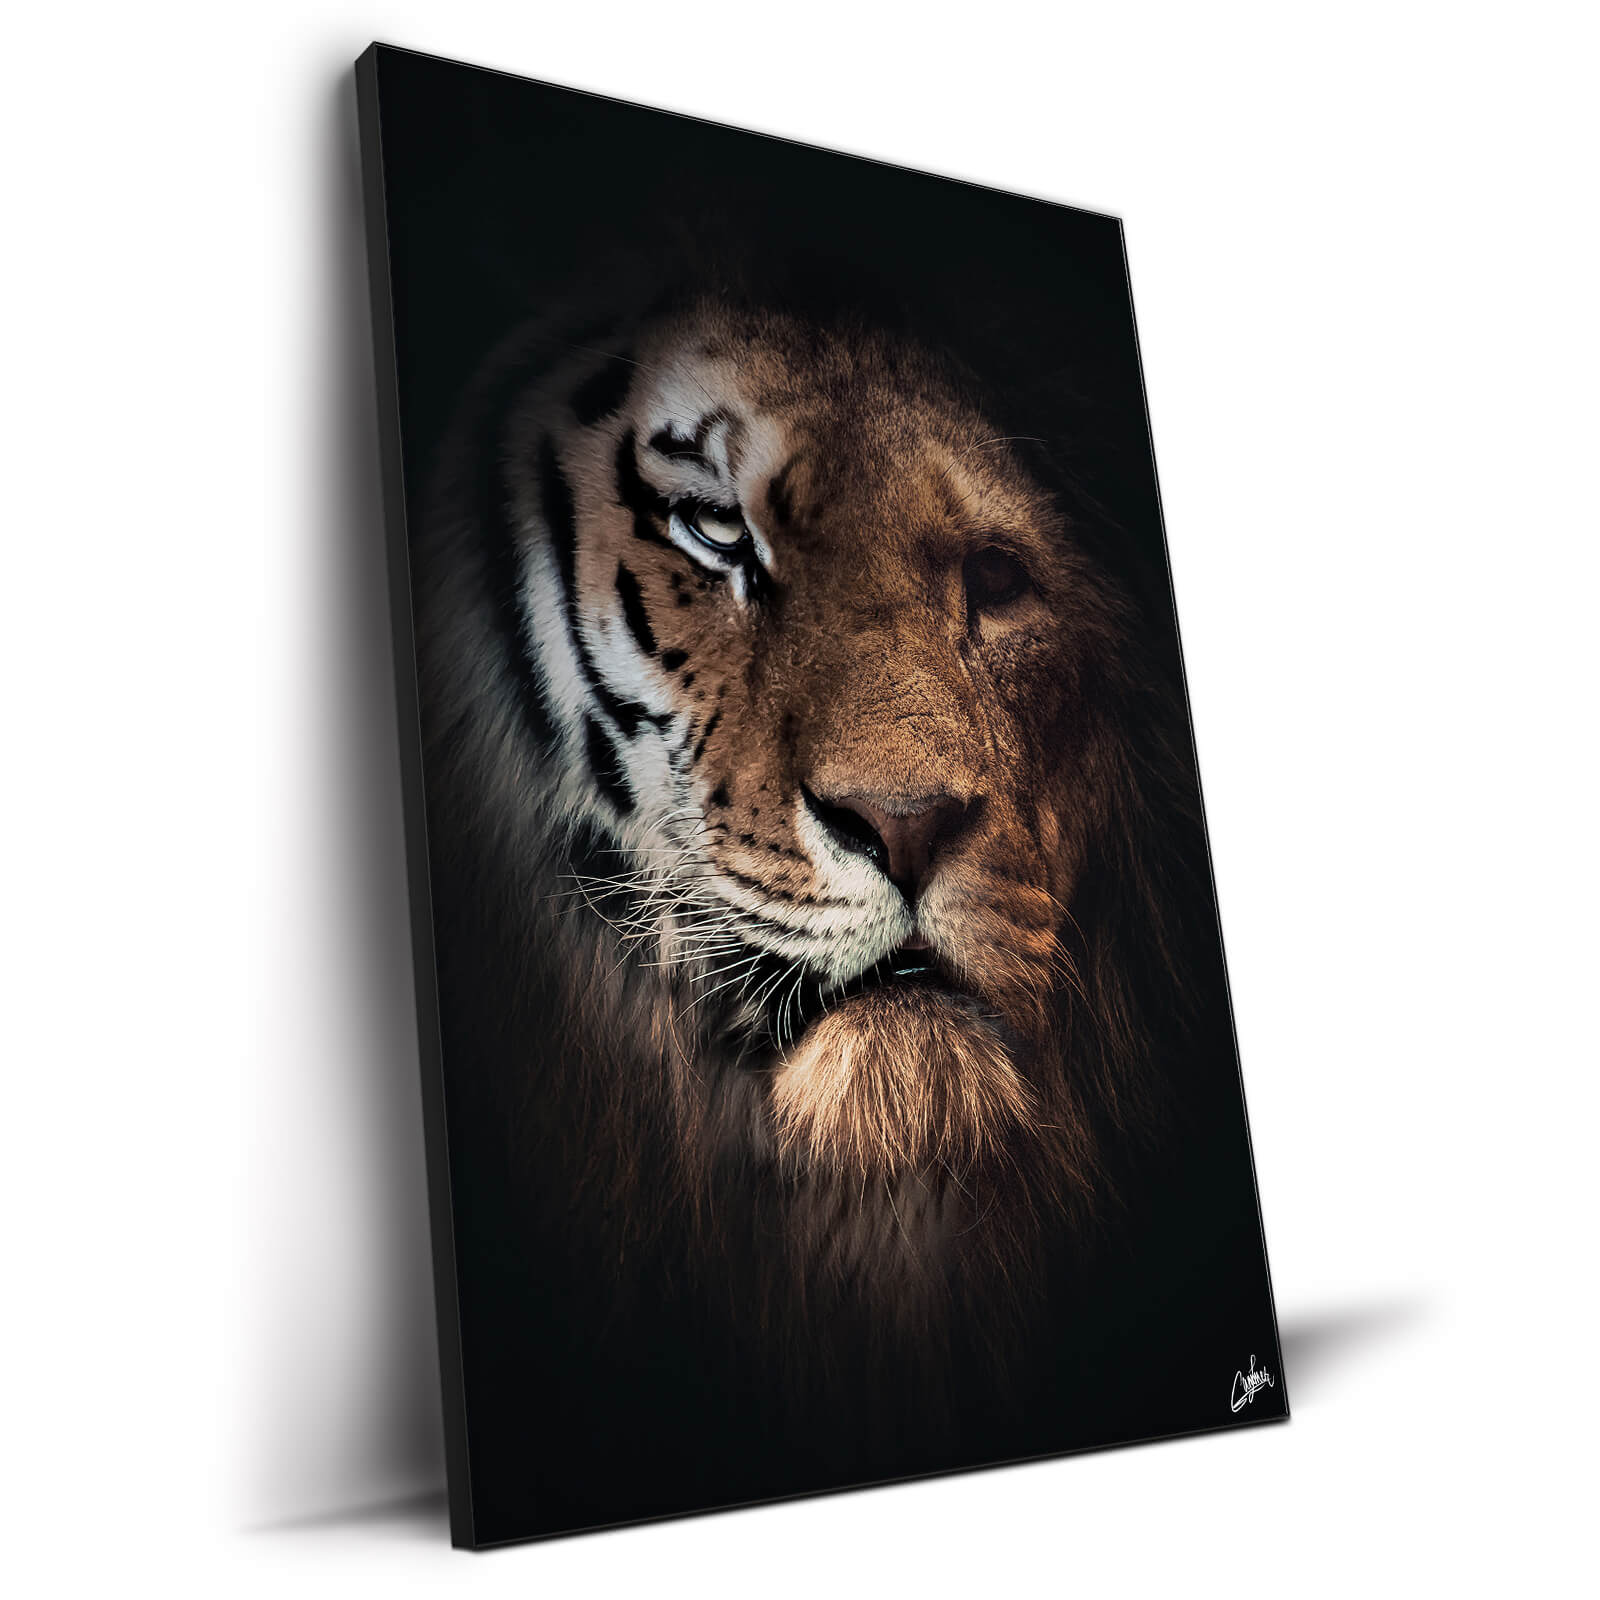 Tiger Thoughts Animals Lions & Tigers Canvas Art Print for Wall Decor 